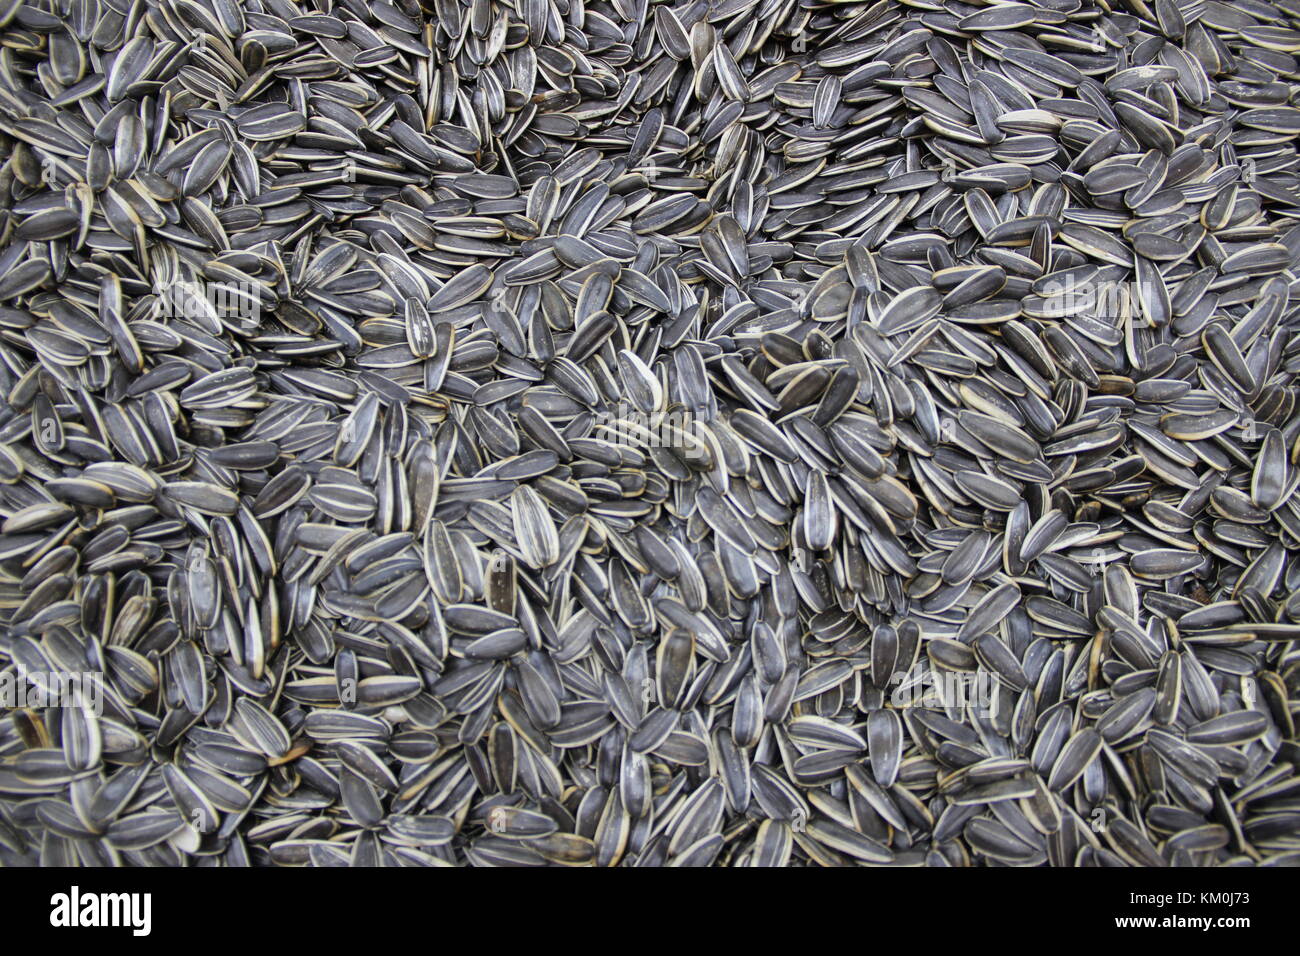 Sunflower seeds on sale in a supermarket Stock Photo